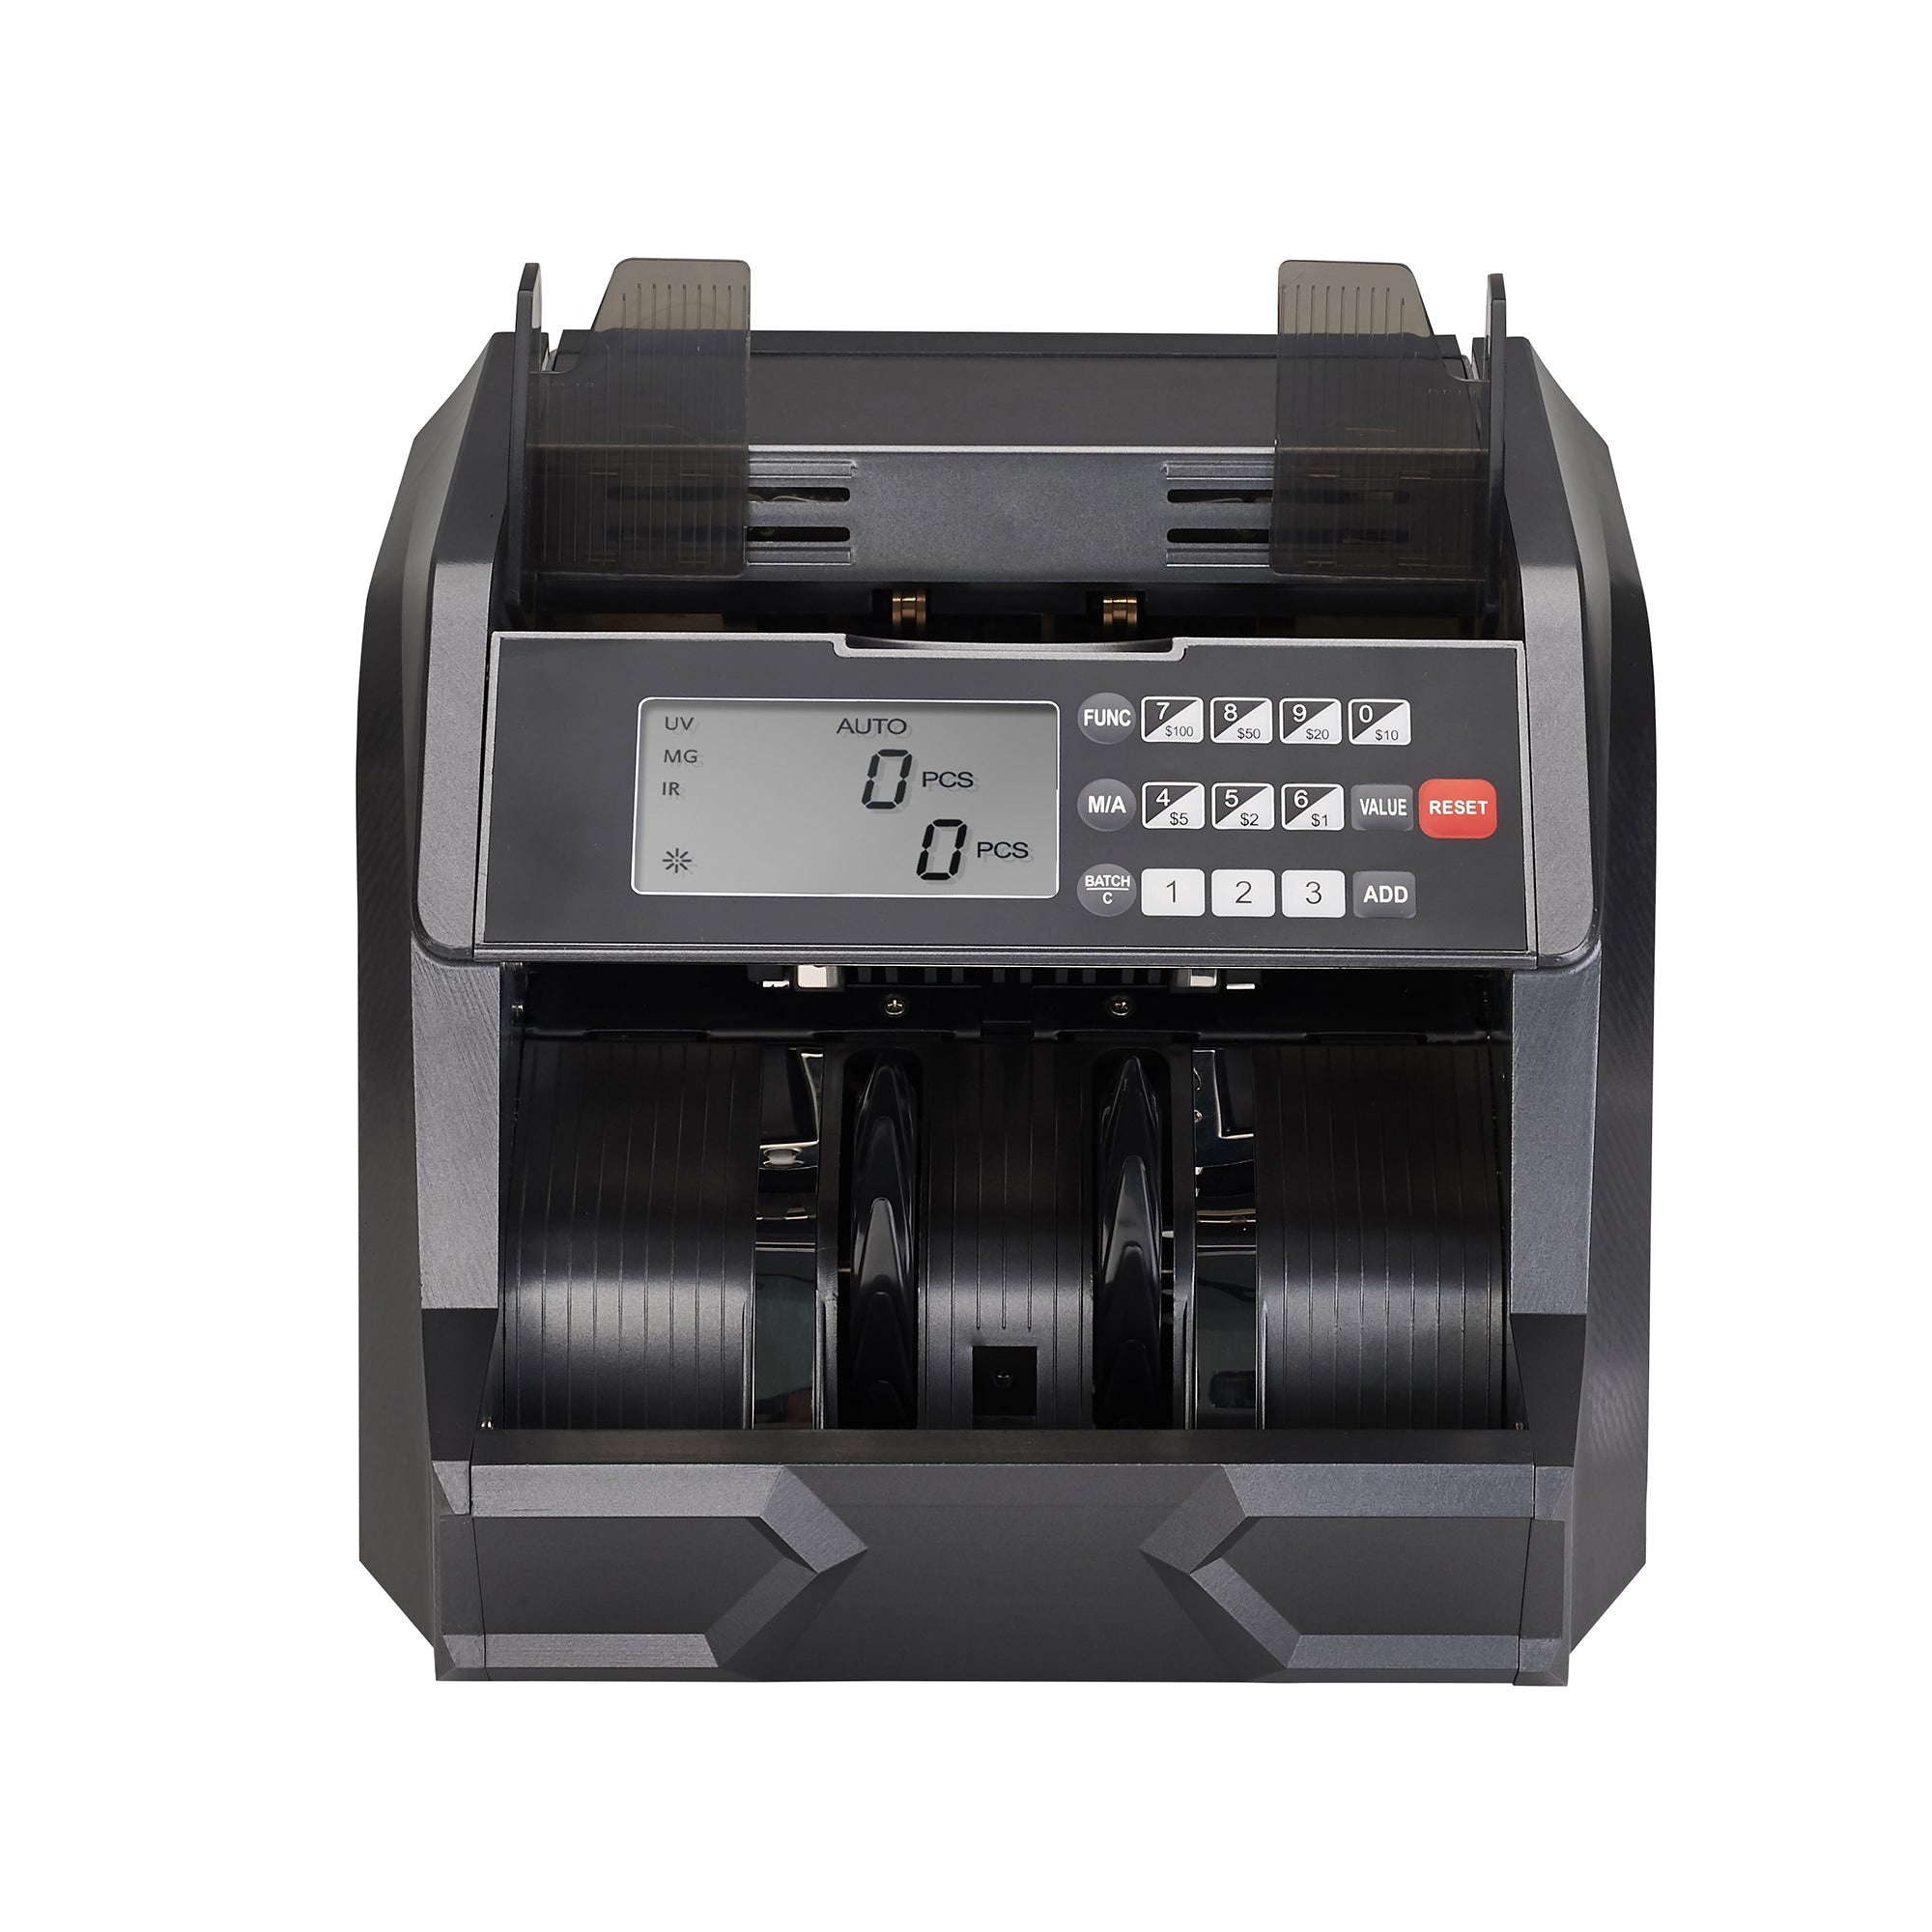 RBC-EG100, Bill Counter with Value Detection, Counterfeit Identification